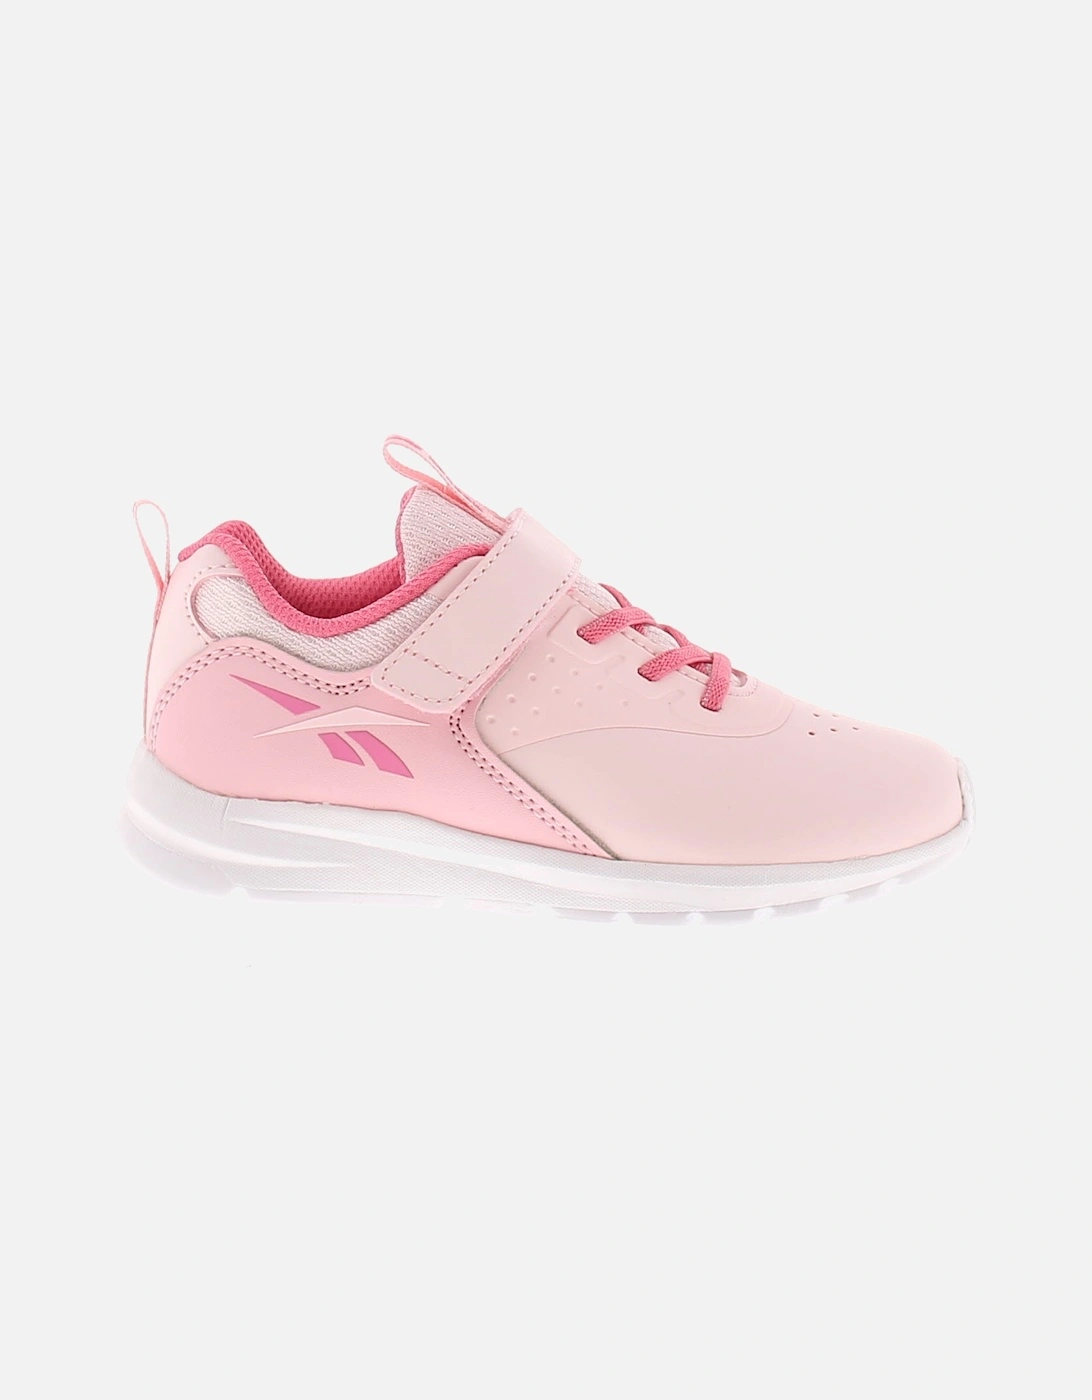 Infant Girls Trainers Rush Runner 4 Touch Fastening pink UK Size